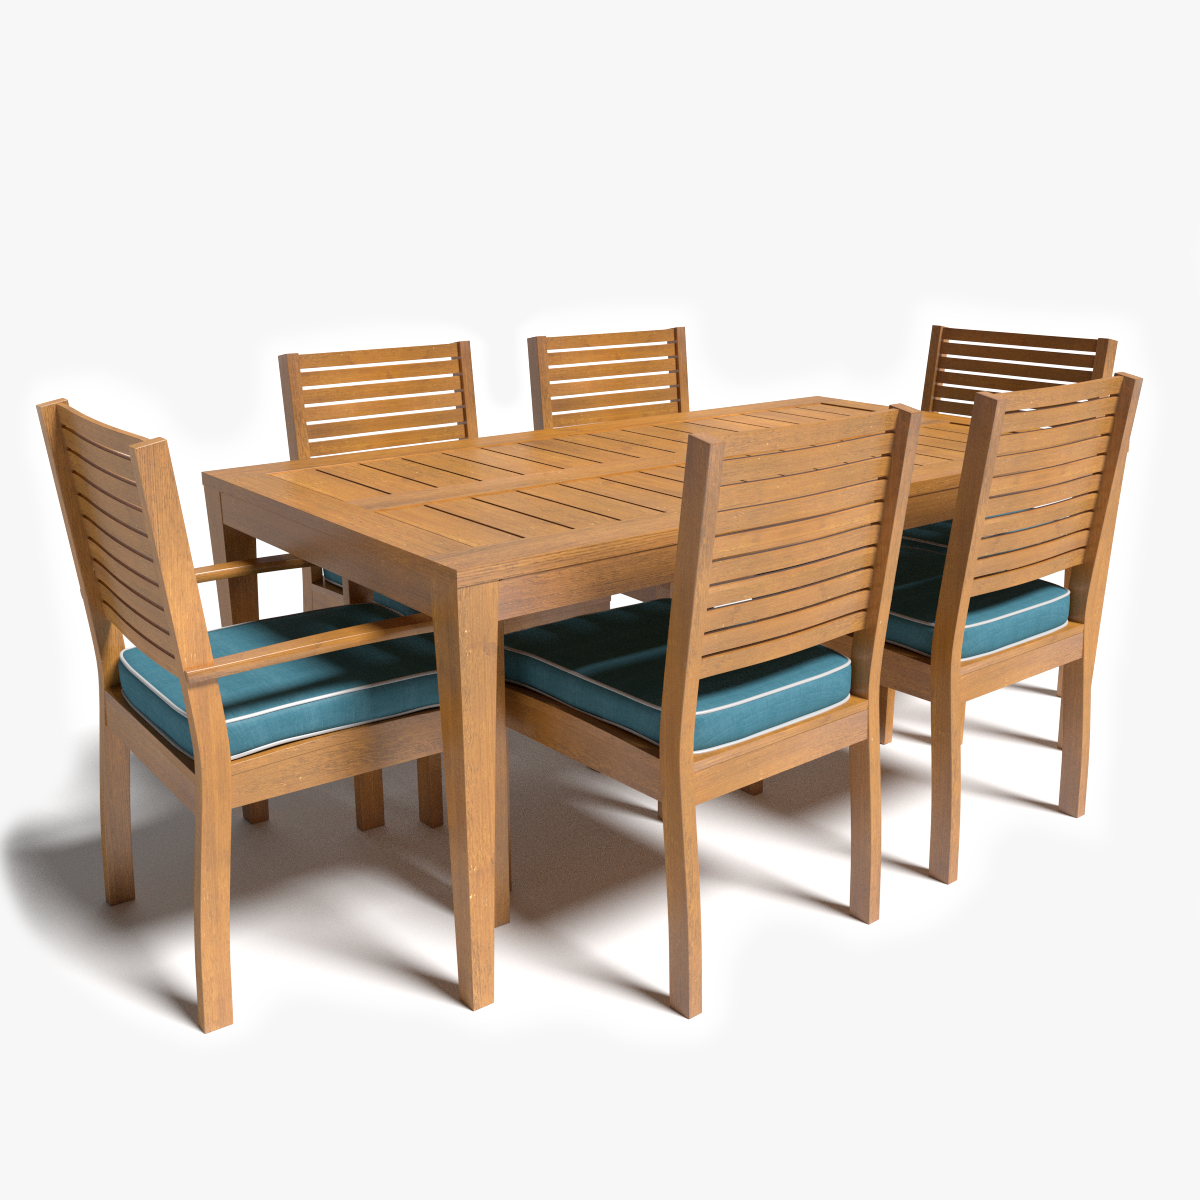 Patio Table And Chairs inside sizing 1200 X 1200